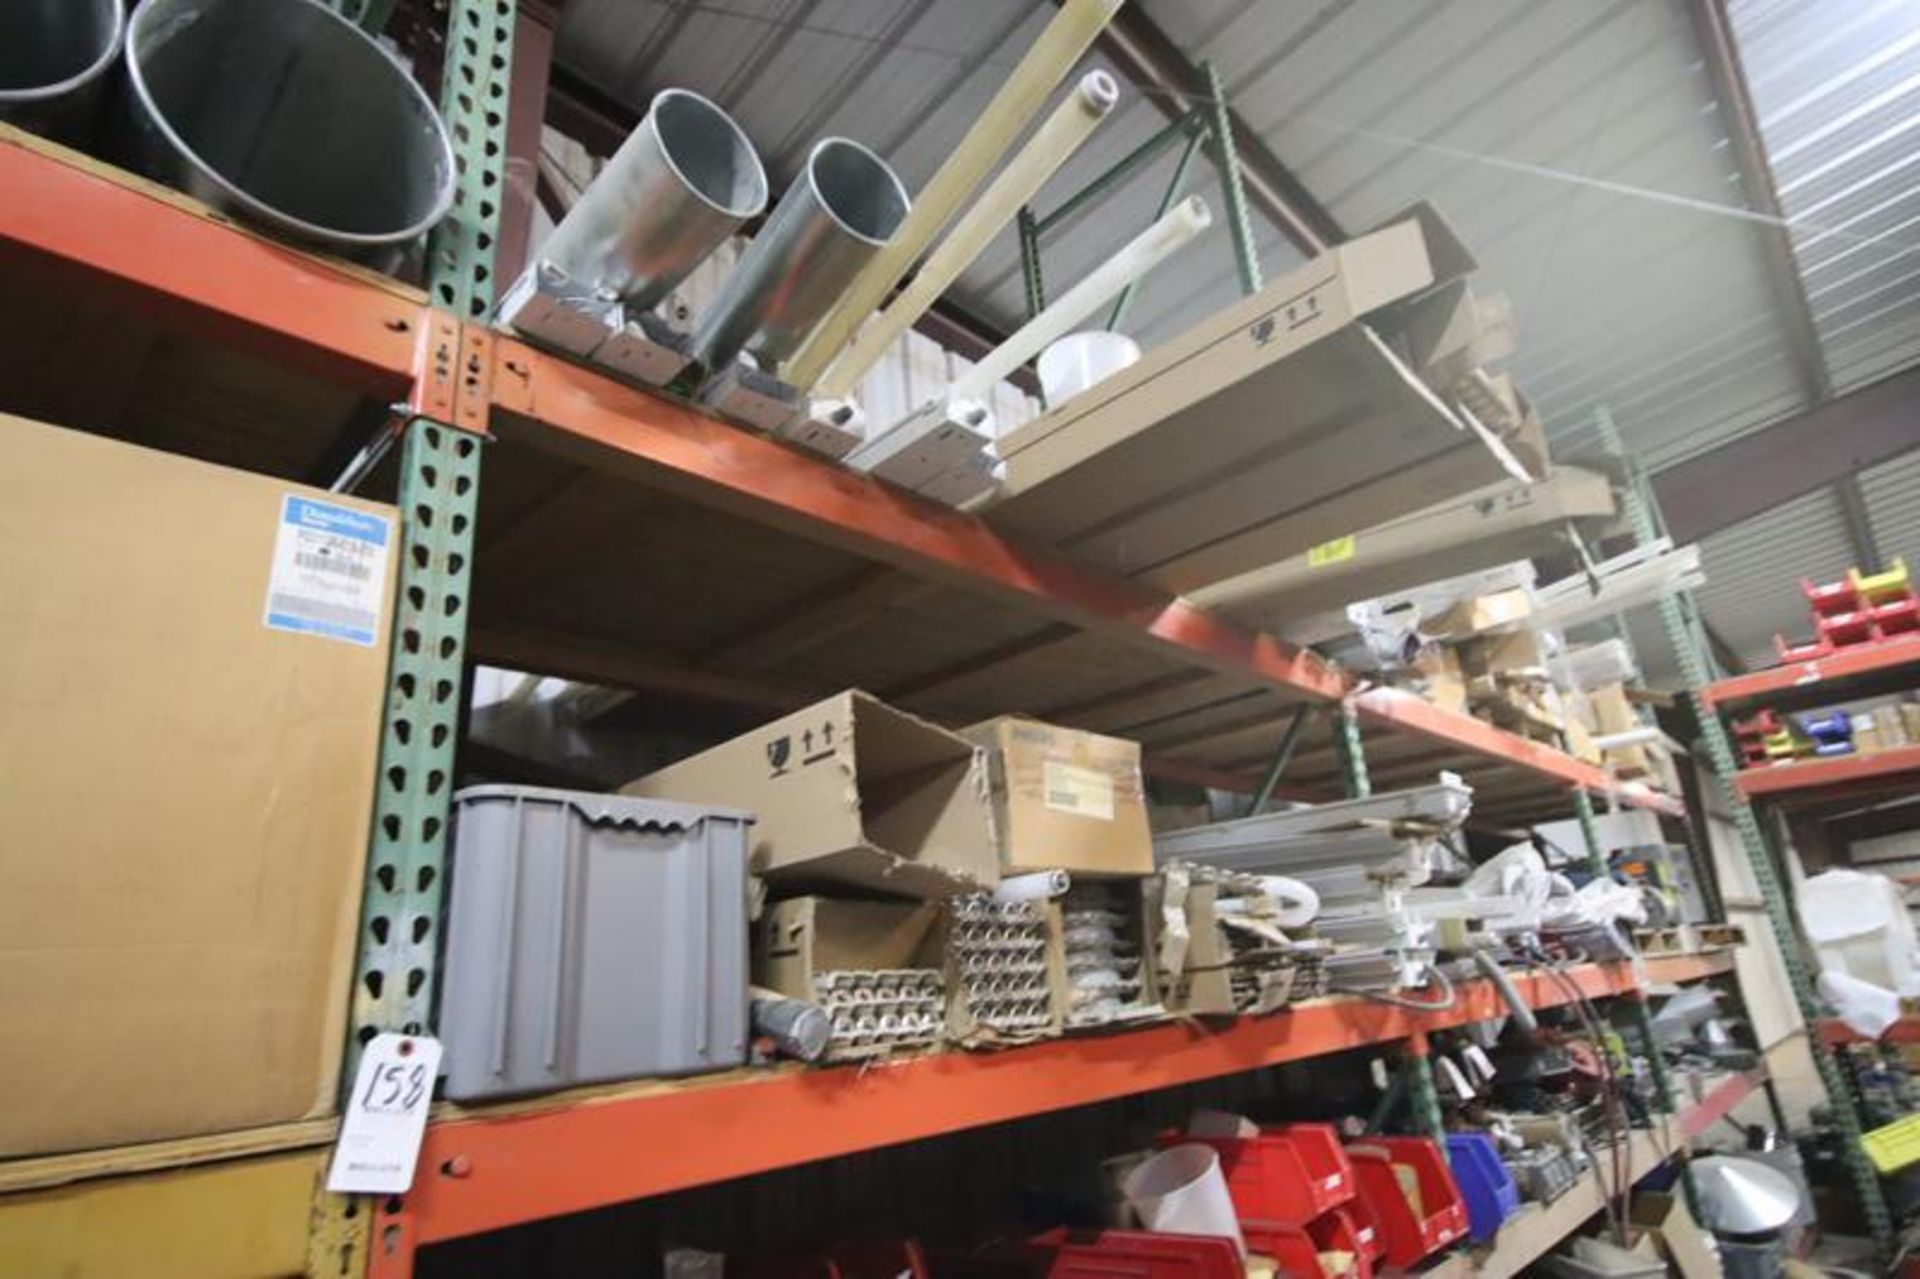 4-Sections of Pallet Racking with Contents-Hangers, Pipe, Valves, Light Bulbs, Heater, Ventilator, B - Image 4 of 9